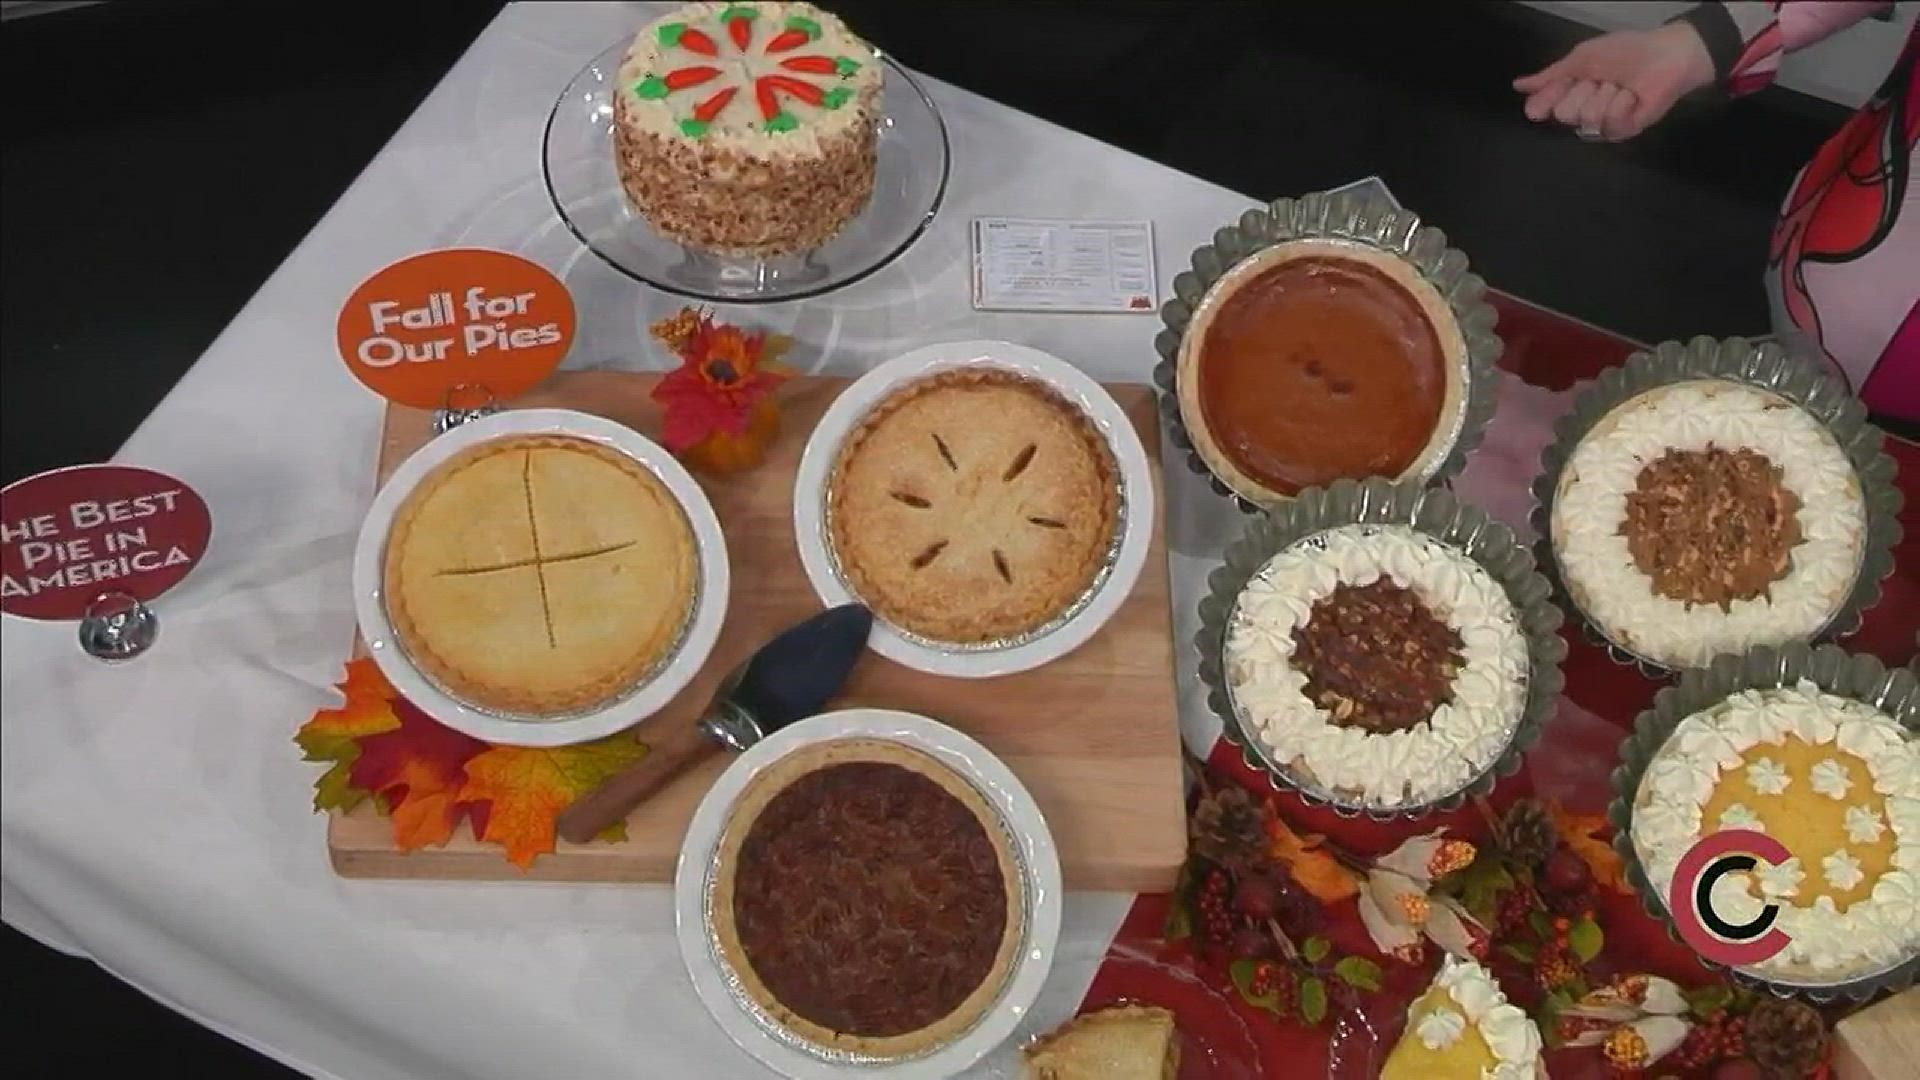 Make sure the best pie in America is served at your Thanksgiving table. Order your fresh, delicious Village Inn pies right now at www.VillageInn.com, or stop by any Village Inn location near you. They're also open on Thanksgiving to serve you and your family!THIS INTERVIEW HAS COMMERCIAL CONTENT. PRODUCTS AND SERVICES FEATURED APPEAR AS PAID ADVERTISING.